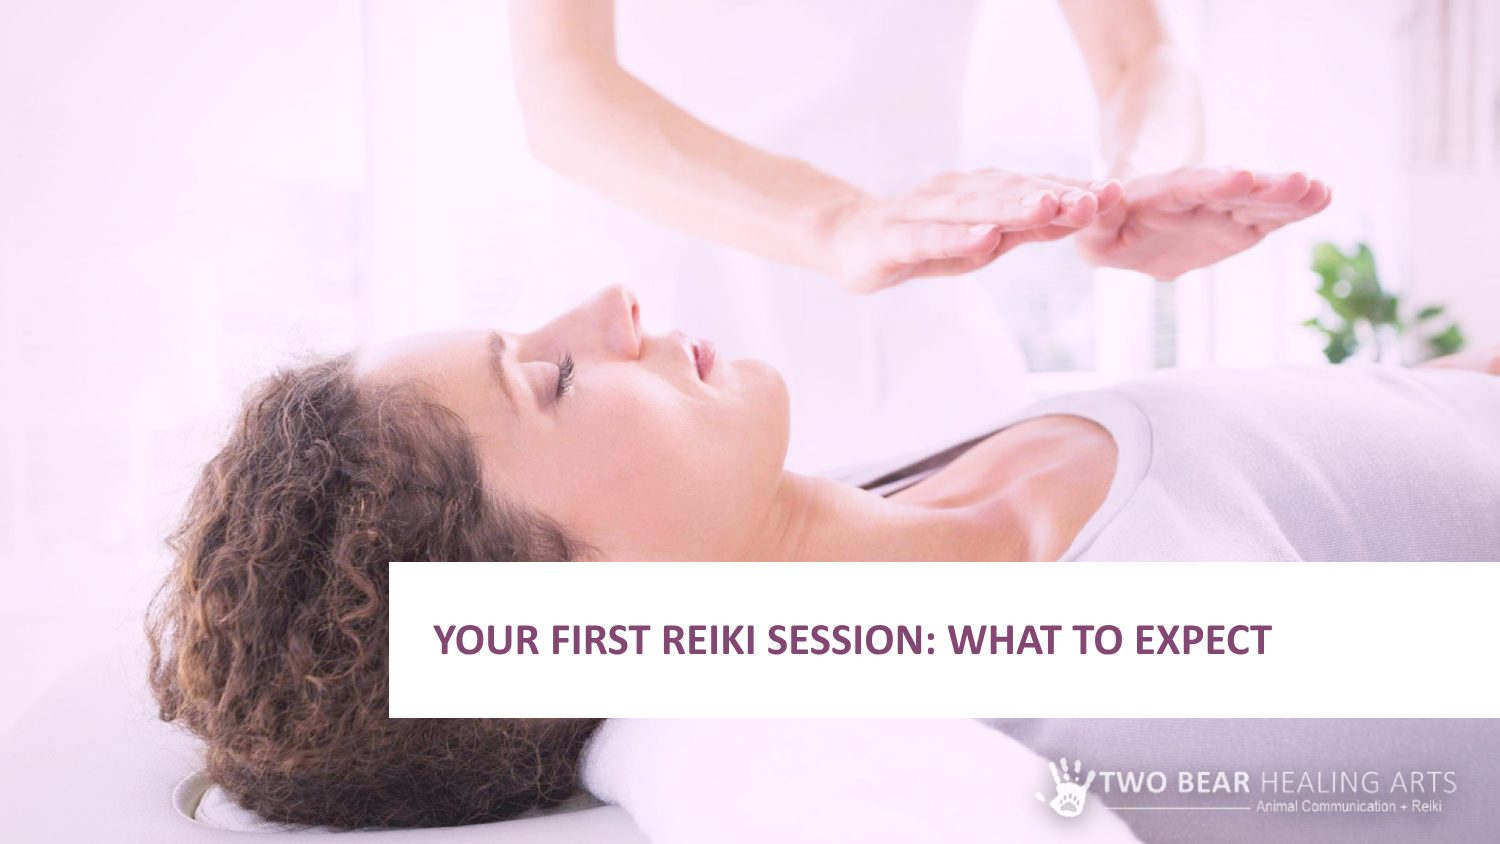 Your First Reiki Session: What To Expect